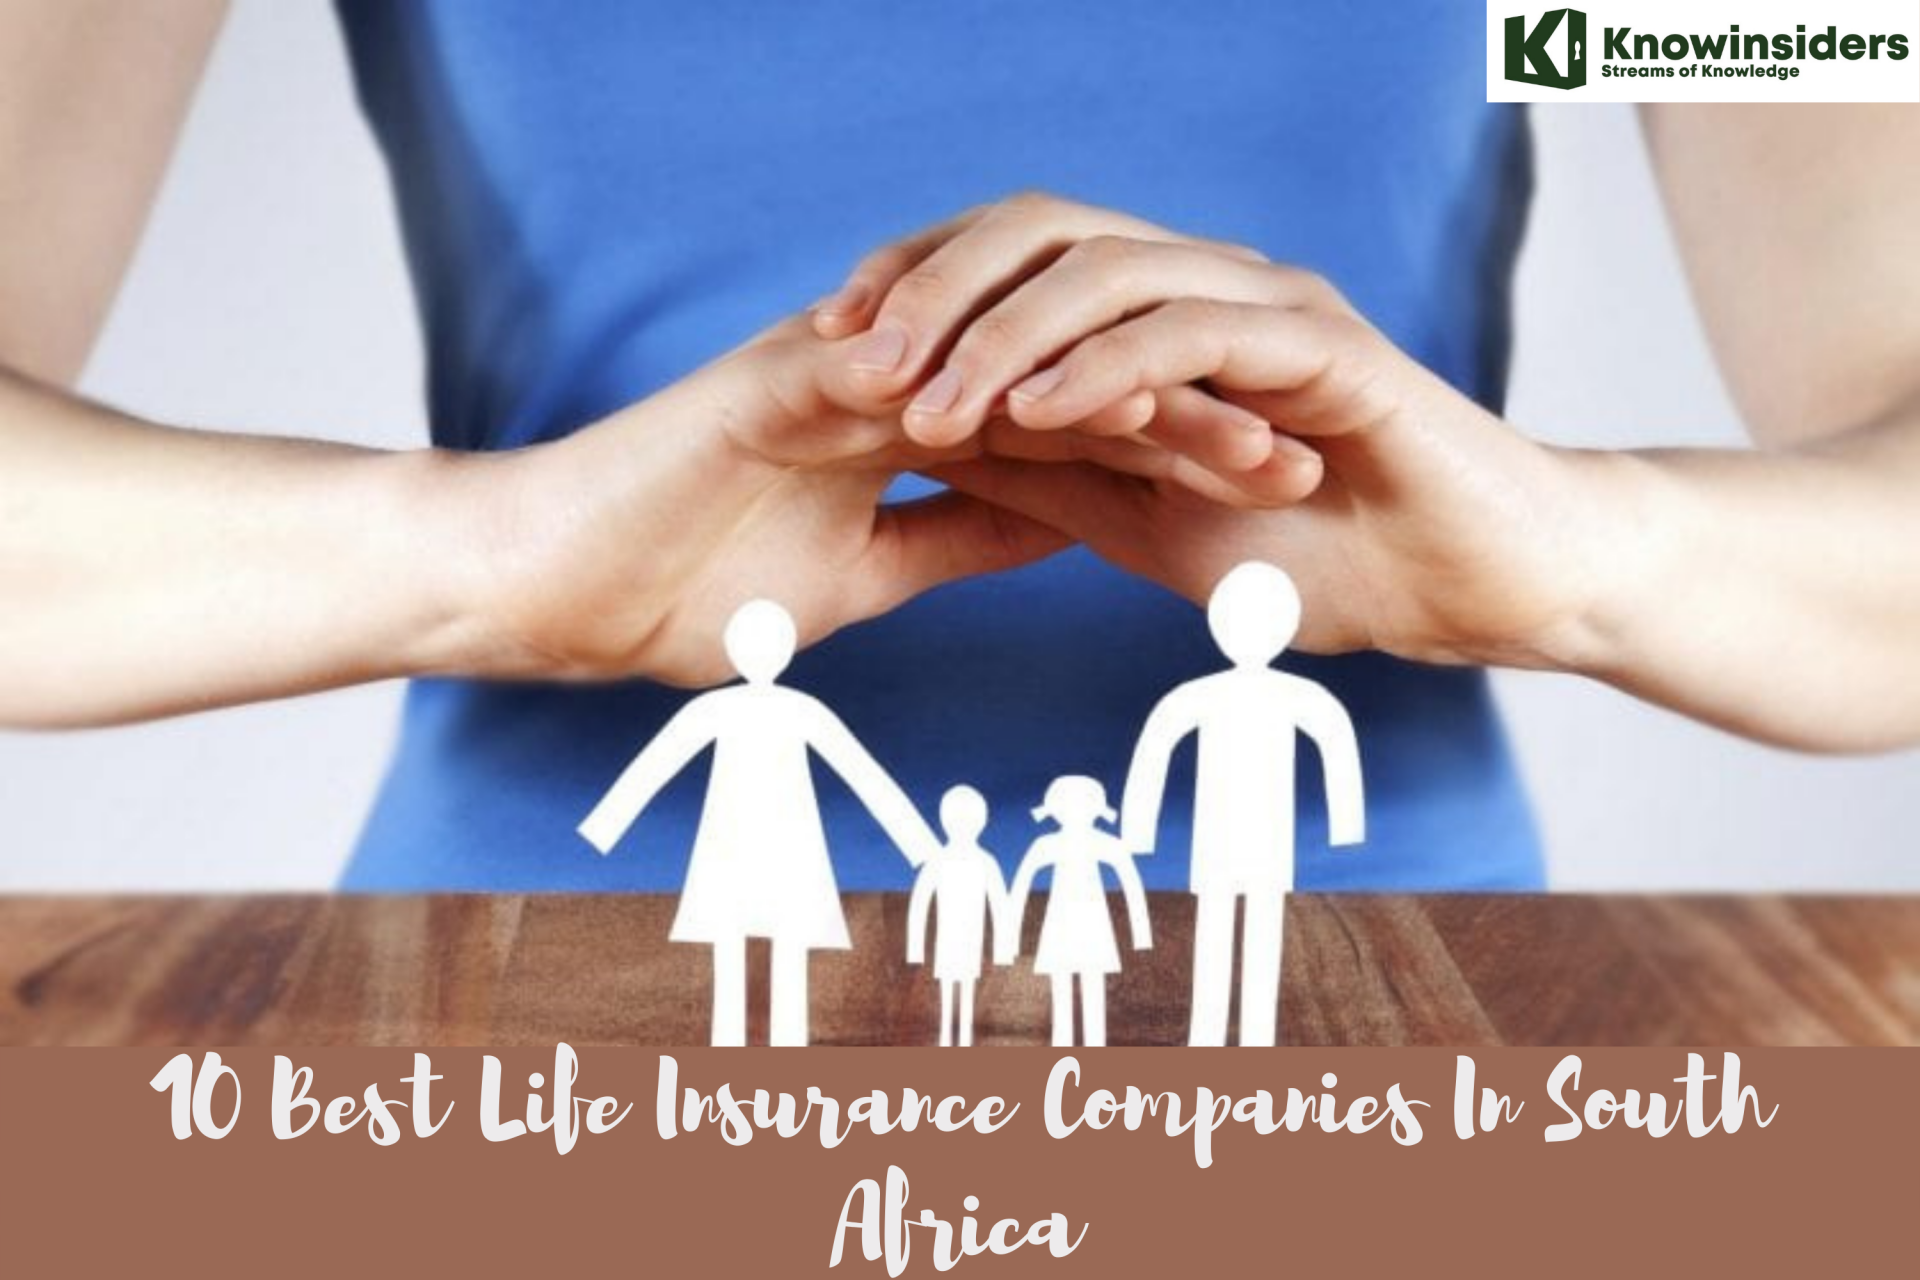 10 best life insurance companies in south africa cheapest quotes and good services